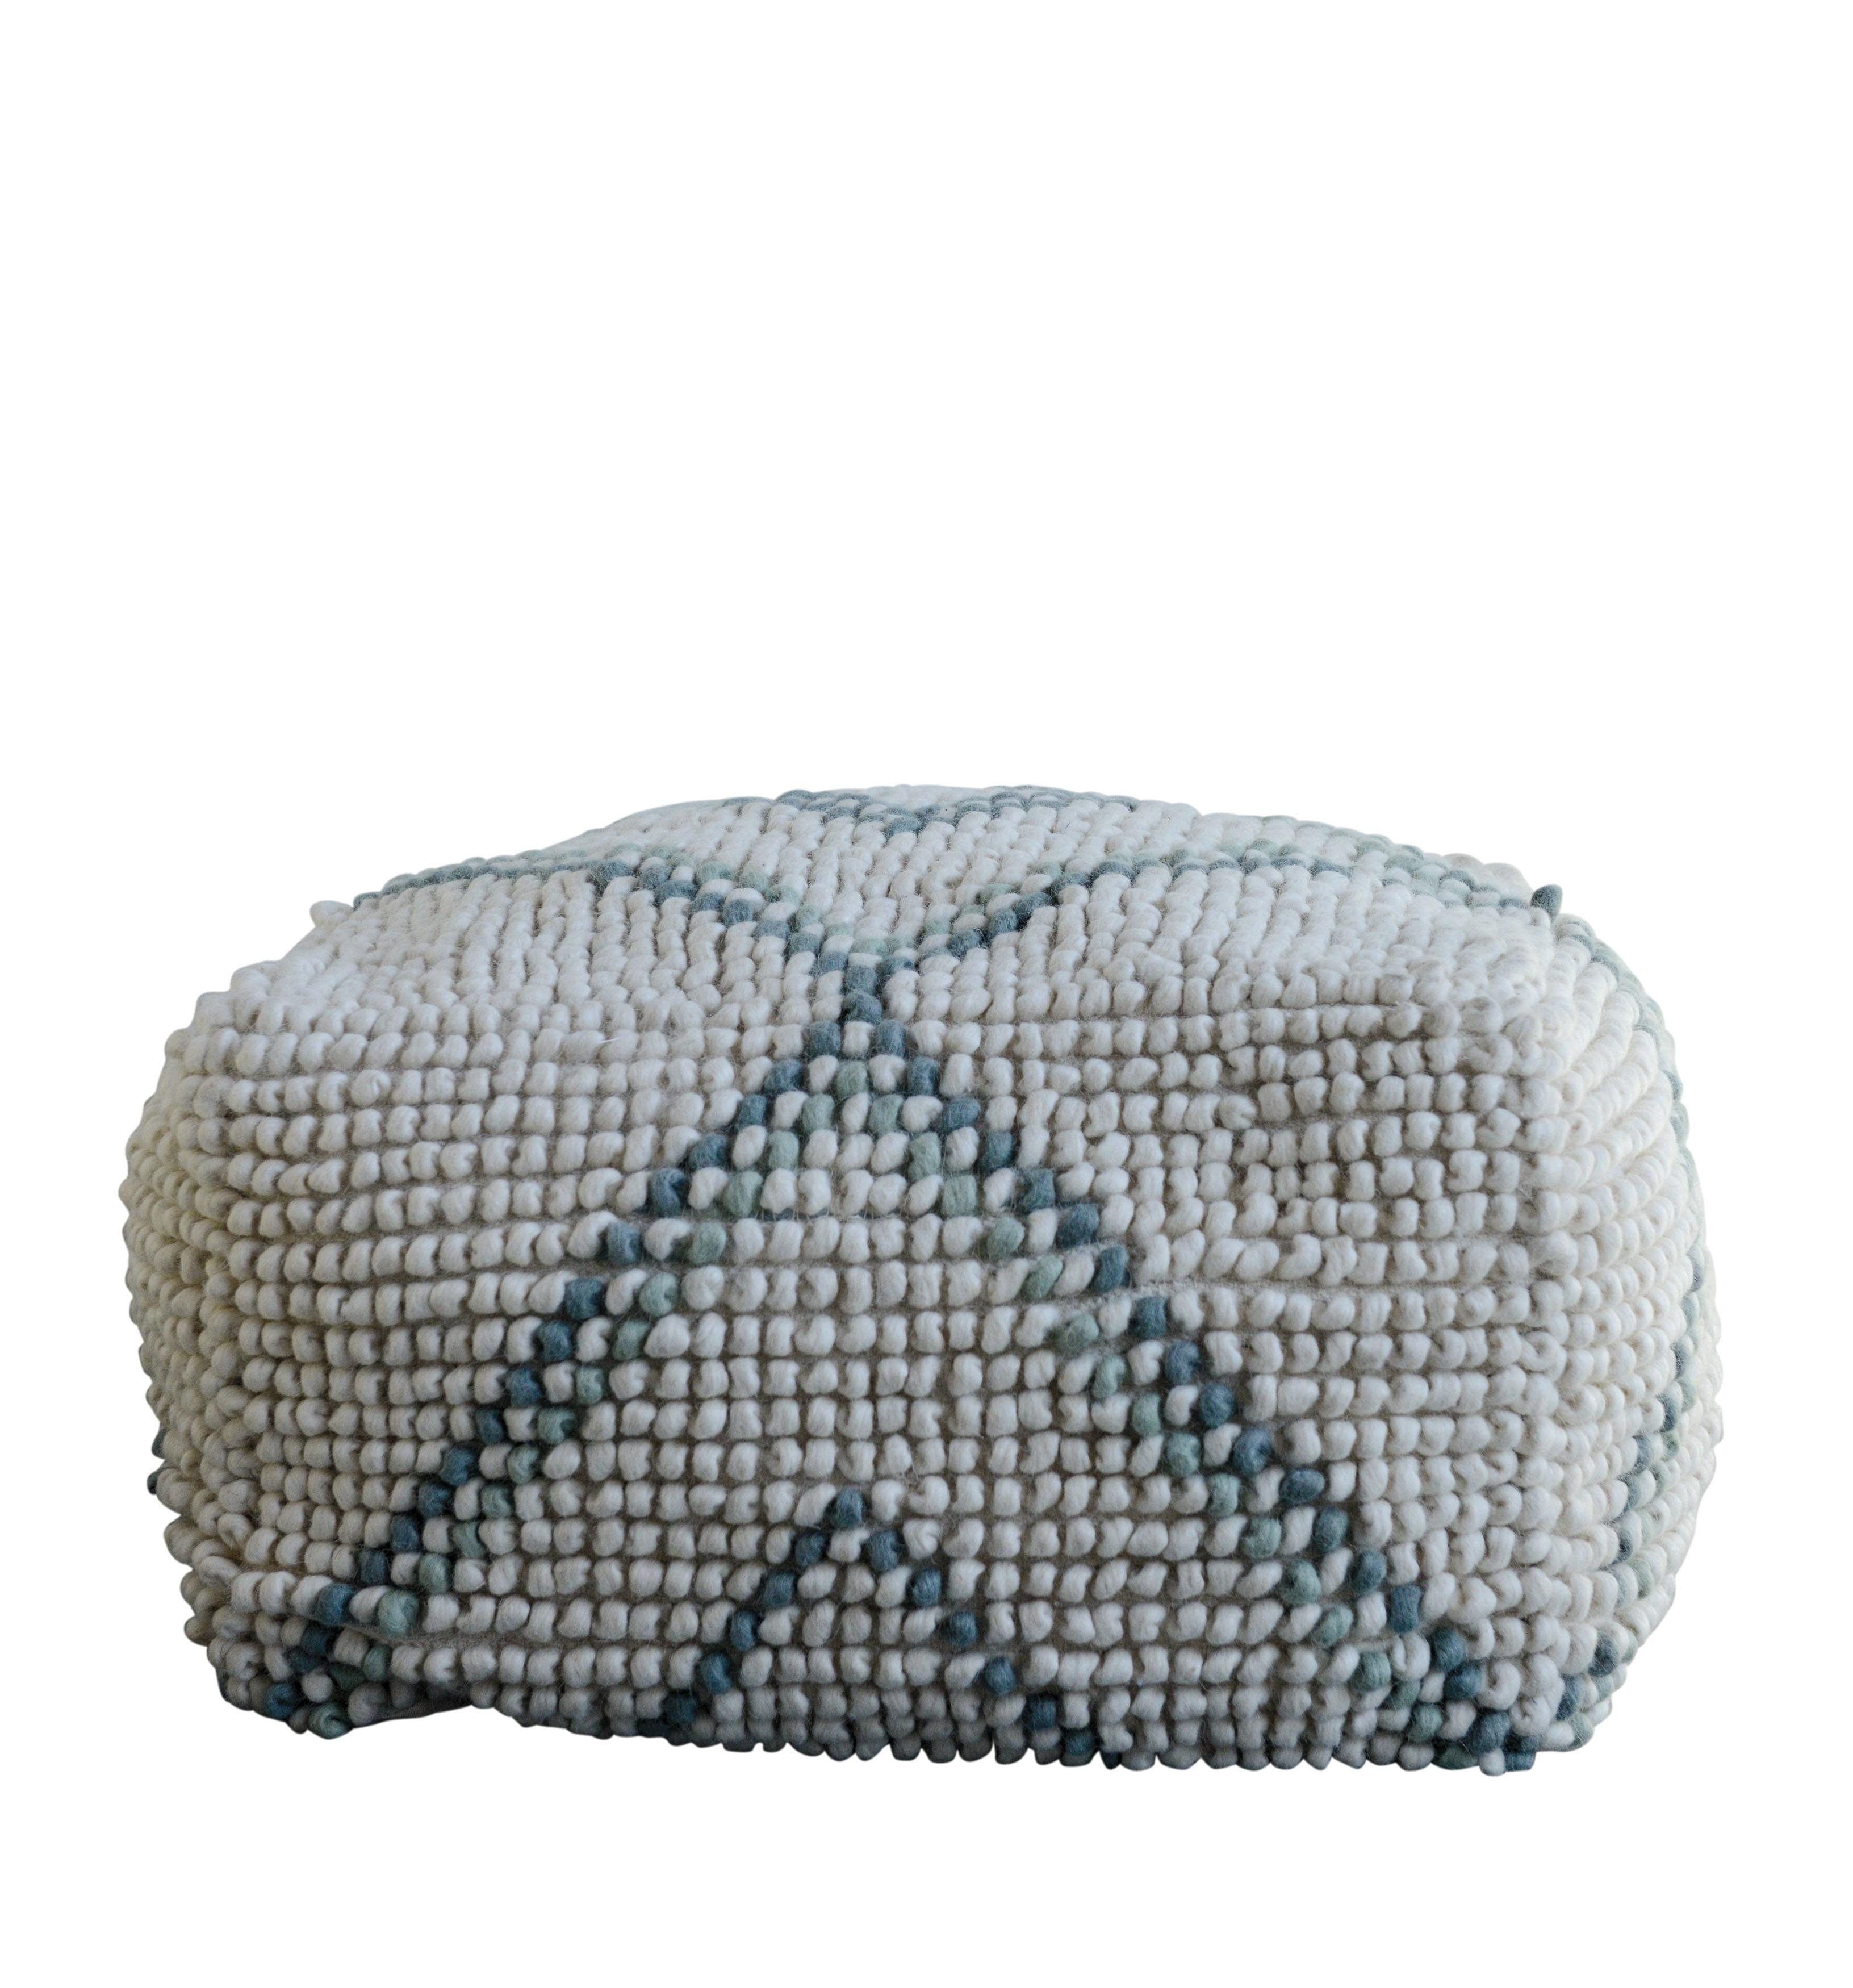 Oversized Cream & Teal New Zealand Wool Square Pouf